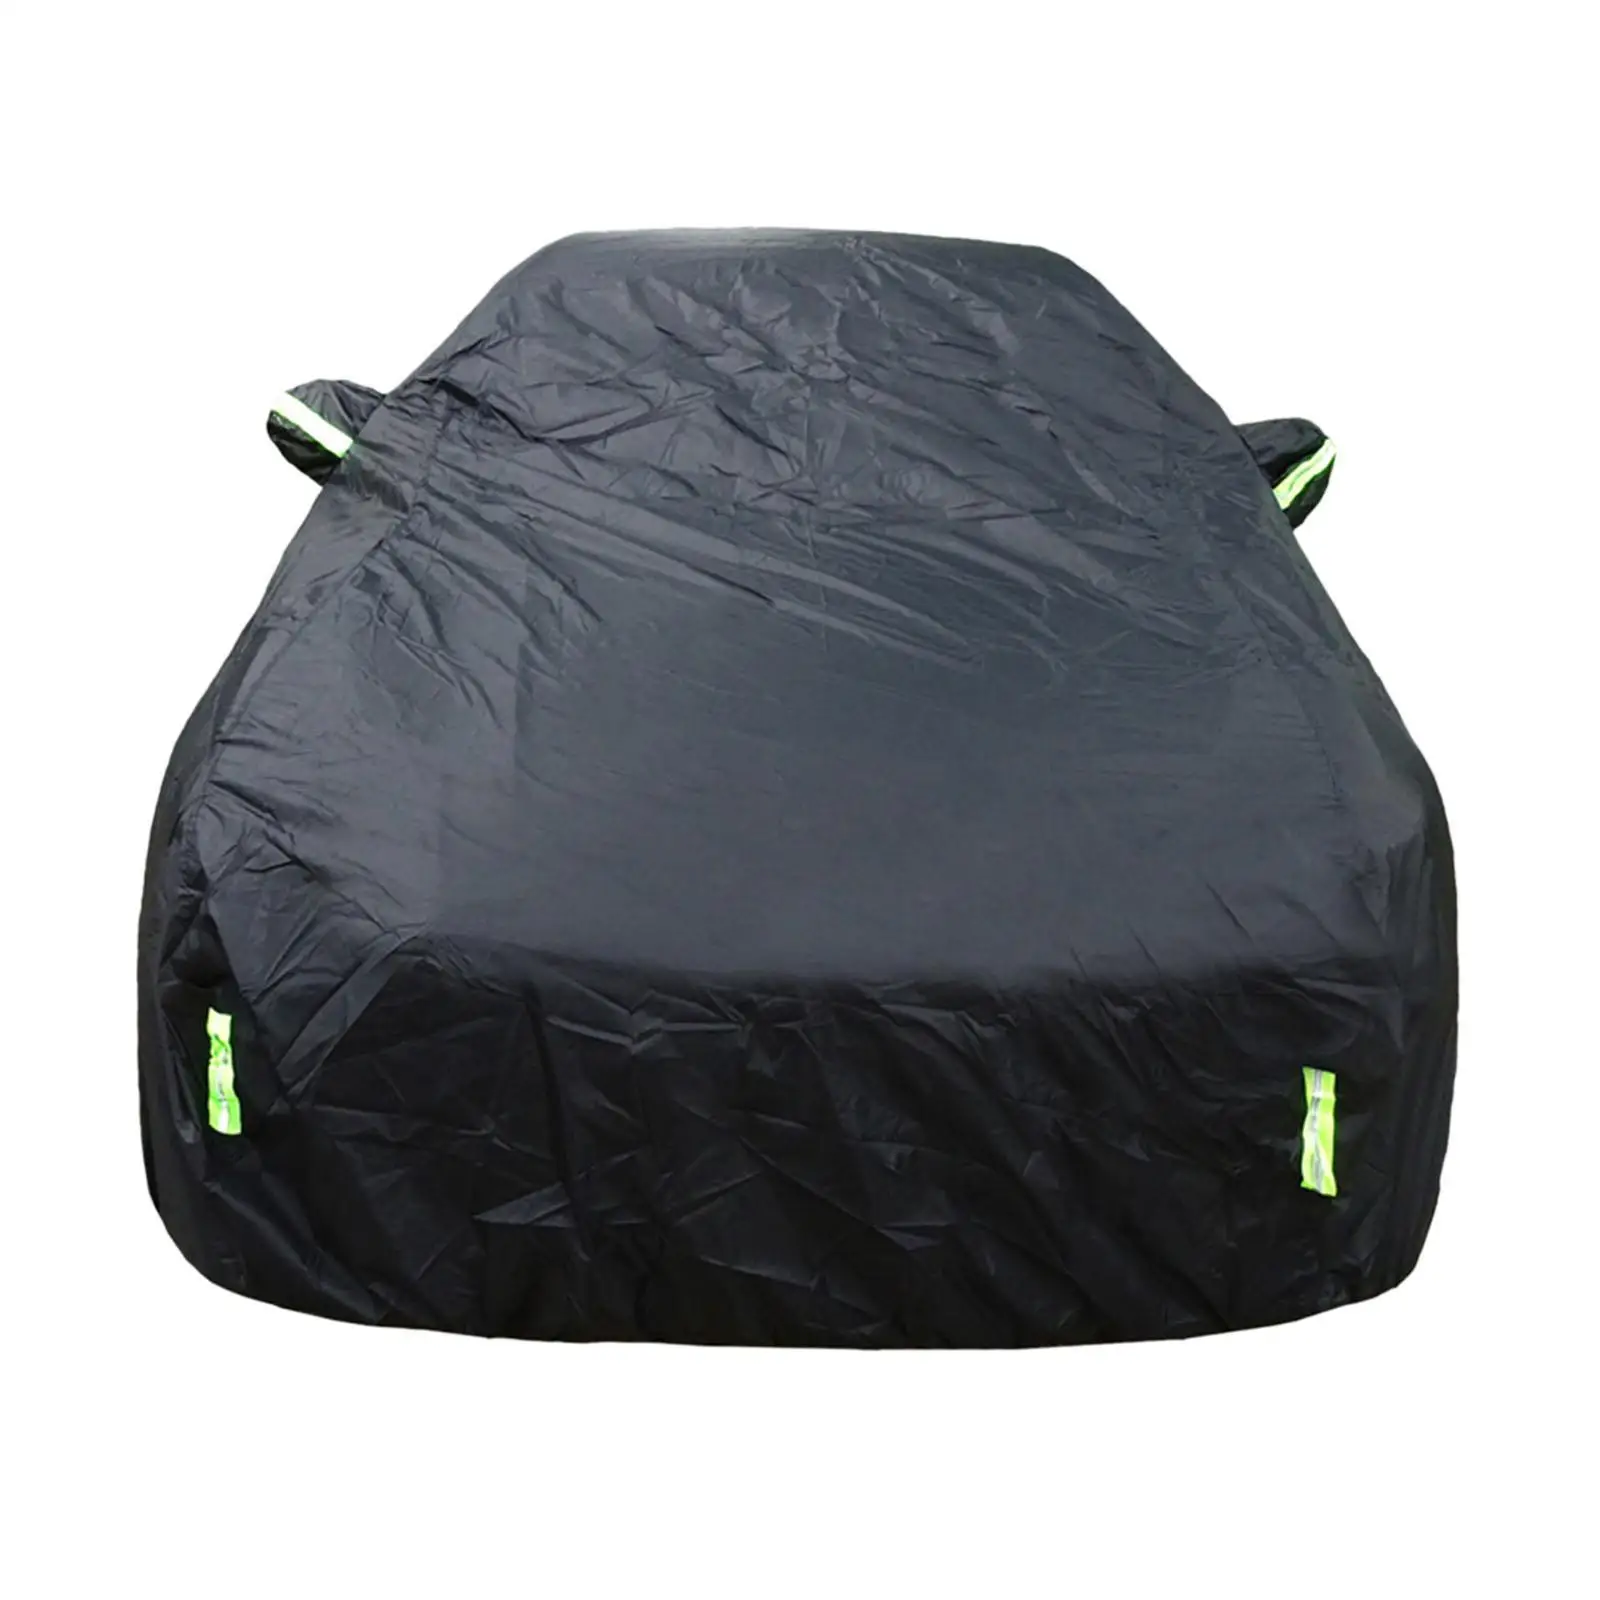 Full Exterior Covers Protection Vehicle for Automobiles Trucks Sedan - £32.00 GBP+